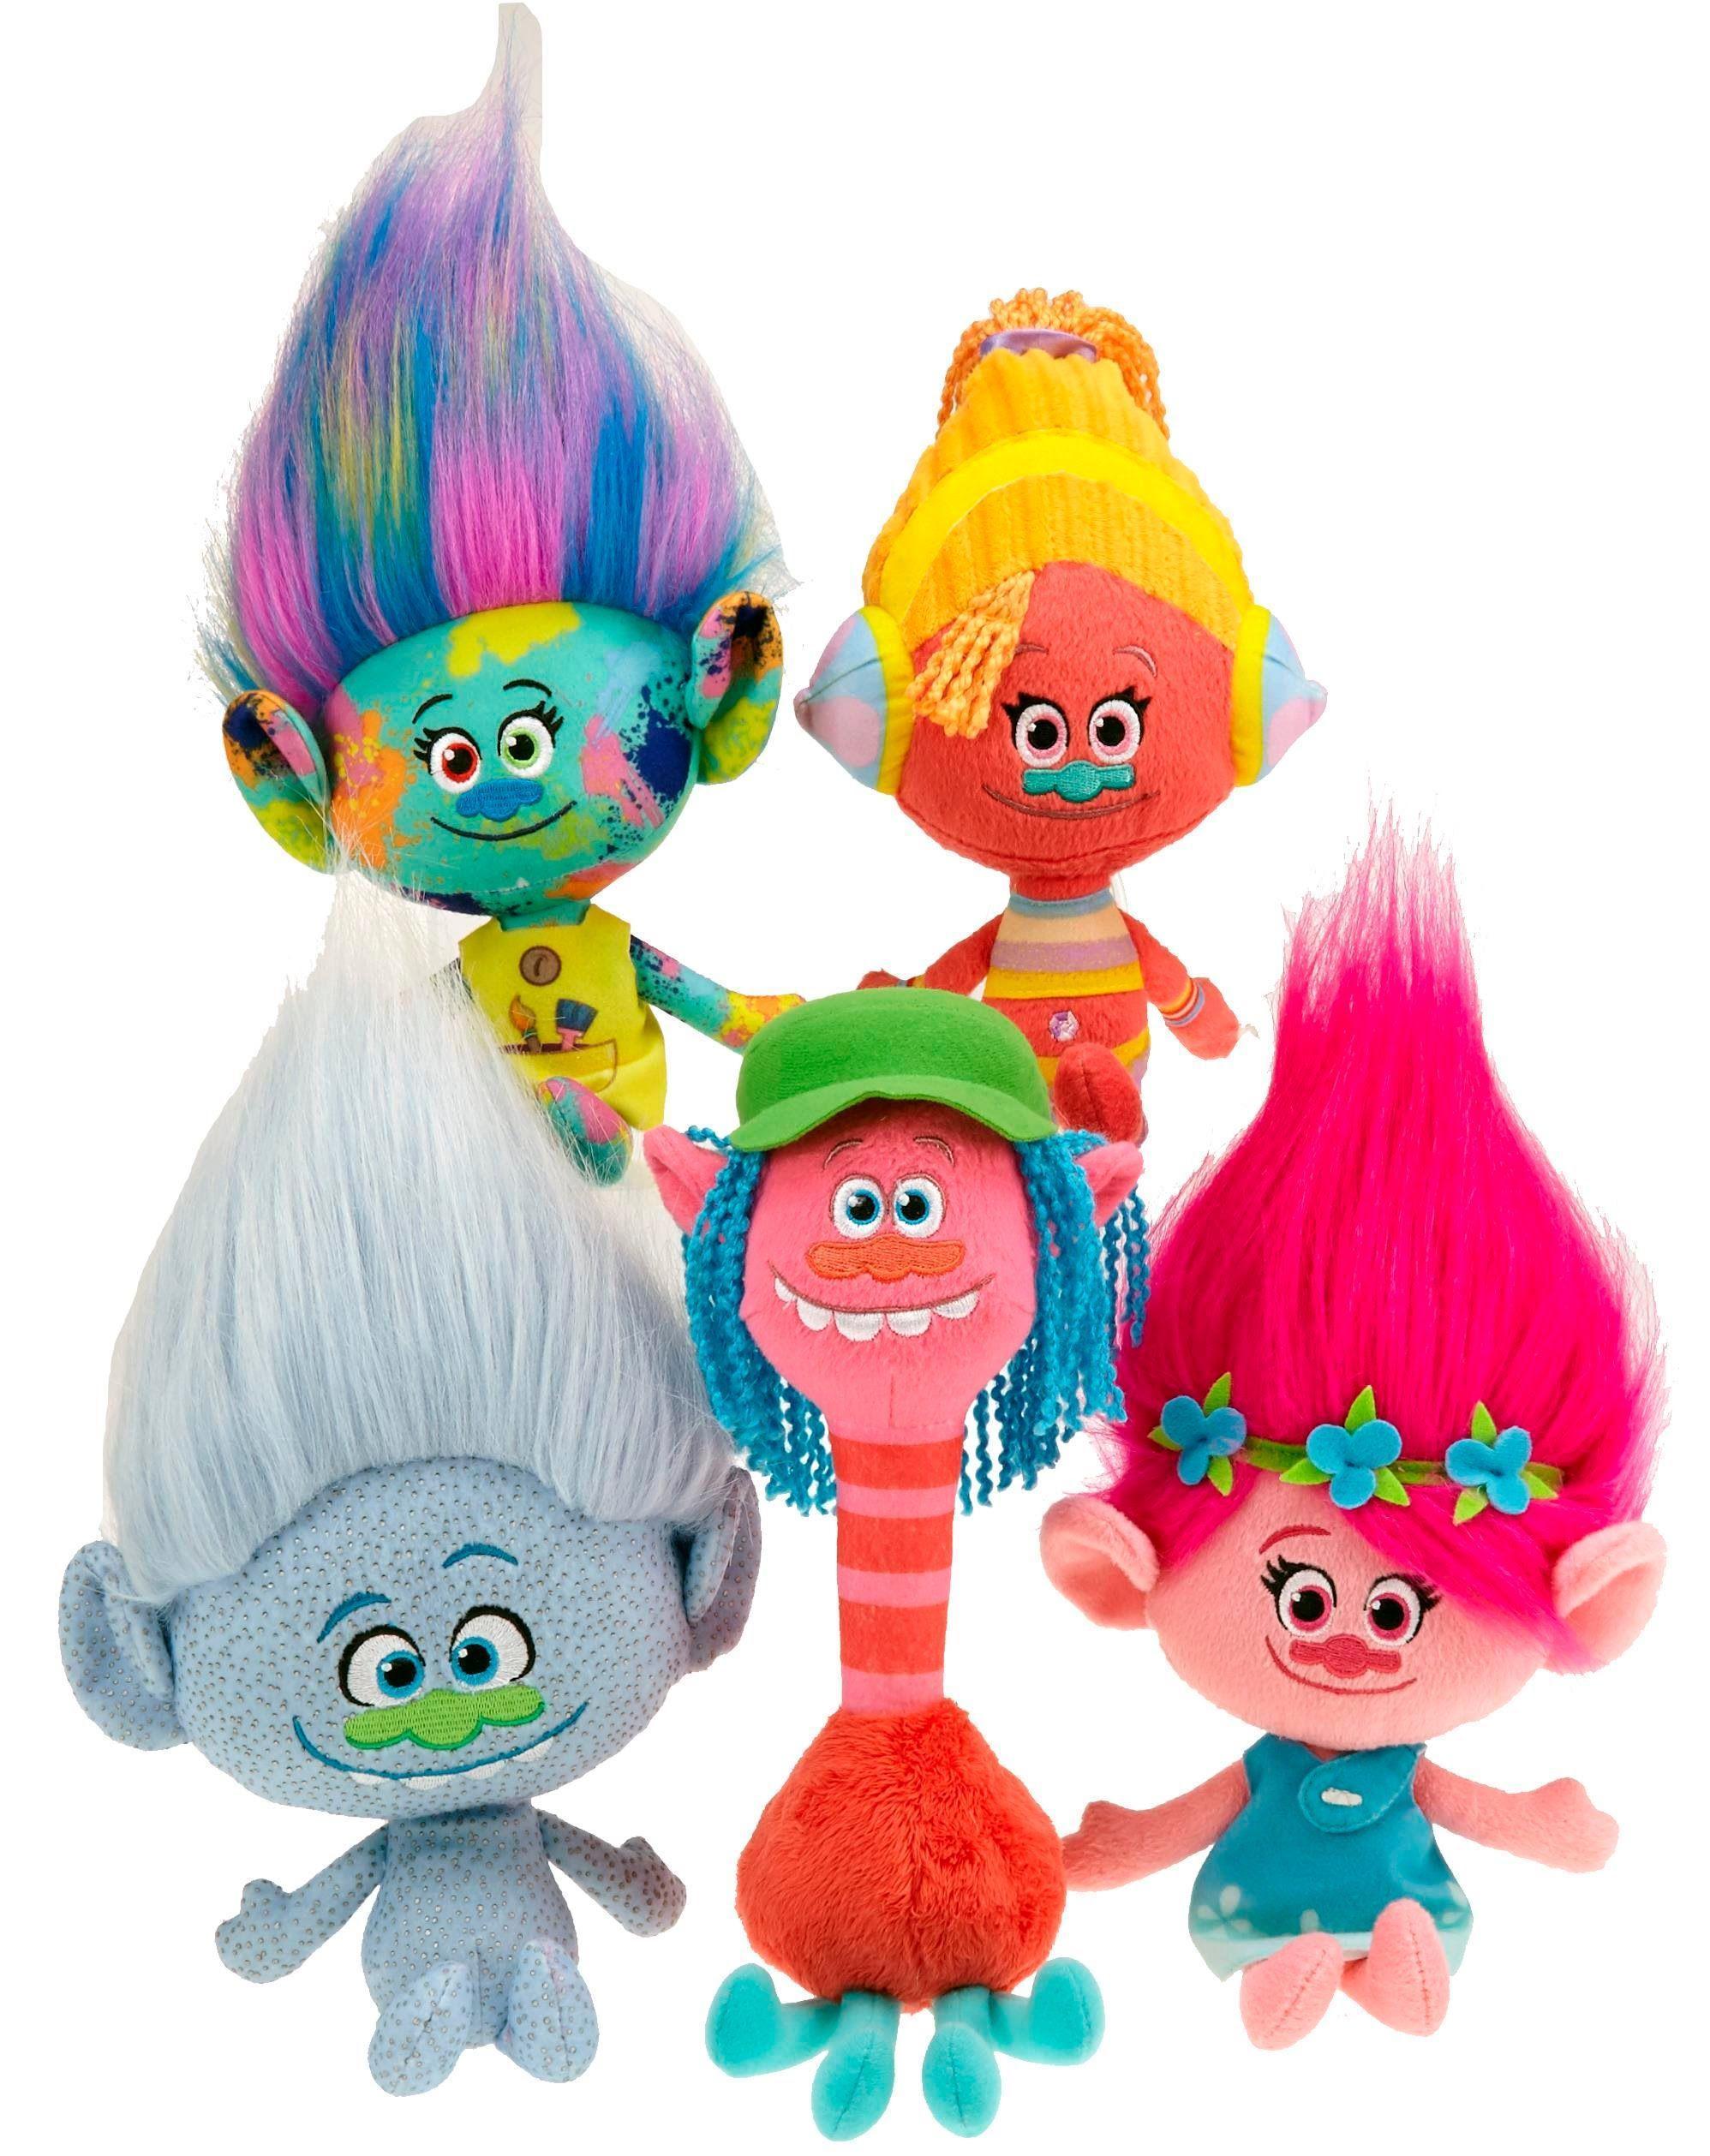 New Trolls from Dreamworks Toys for First Look Toy Fair 2016